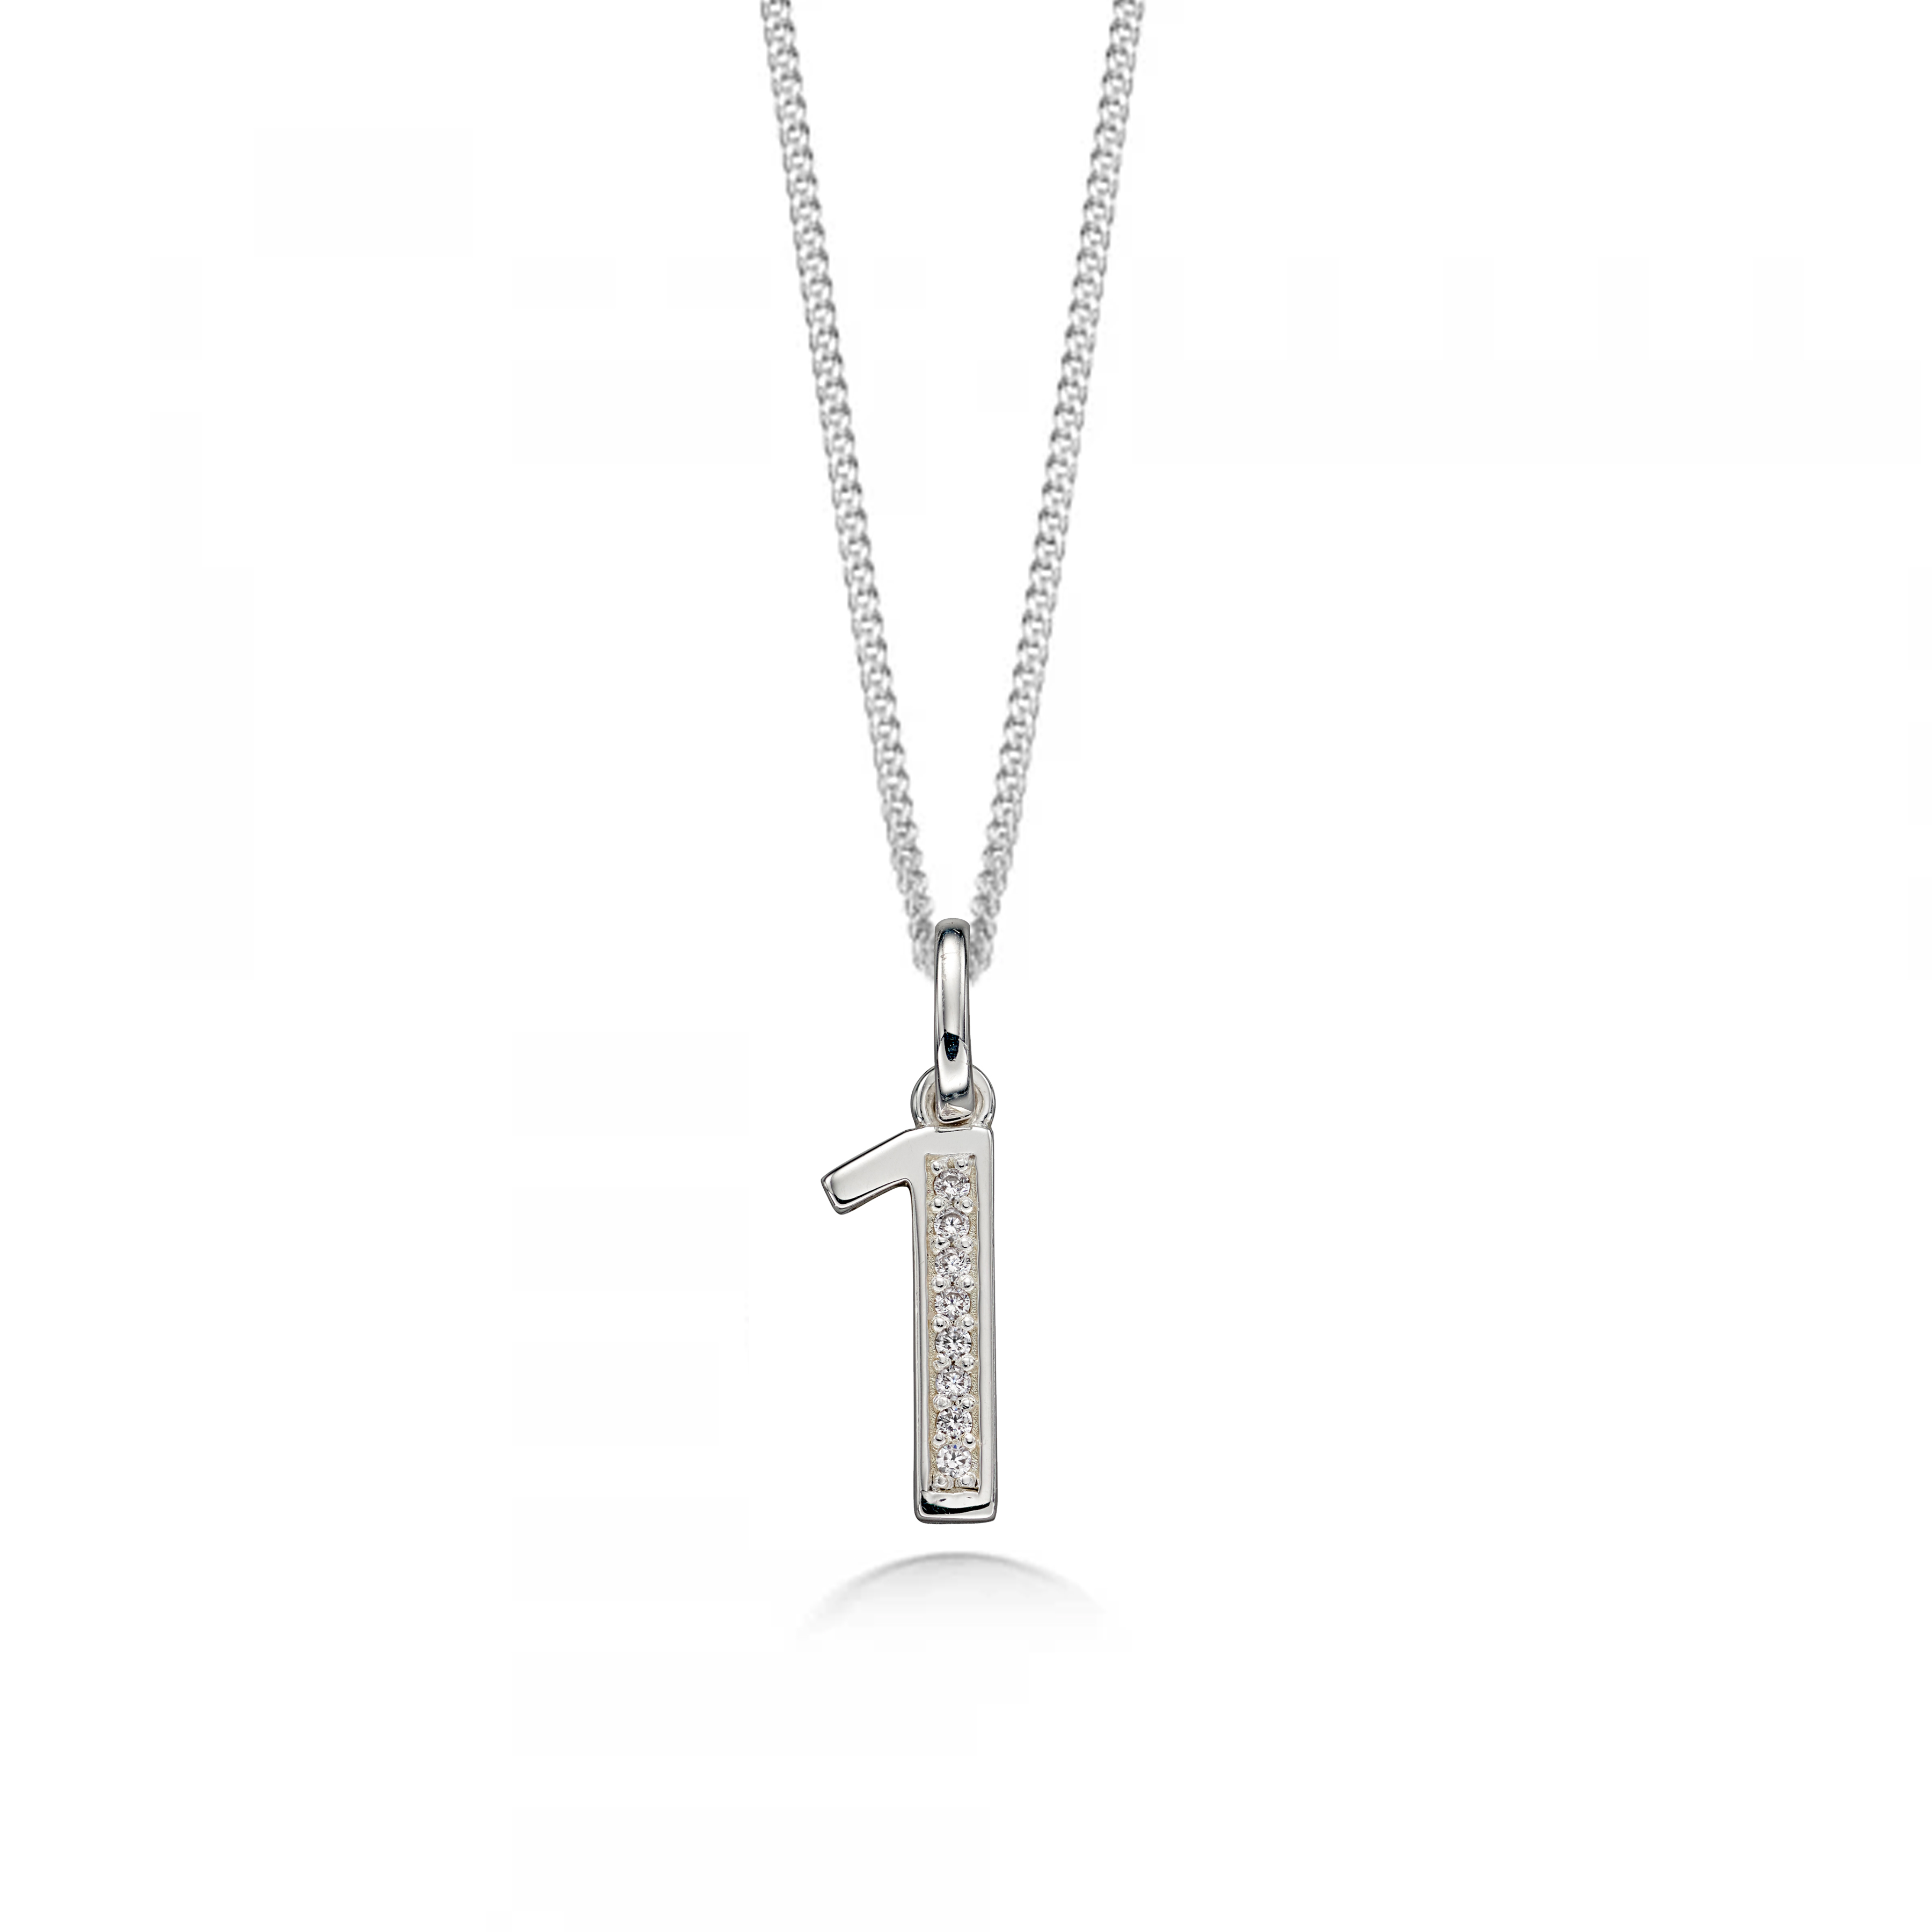 Pave Setting Number One Diamond Neckalce and Pendant